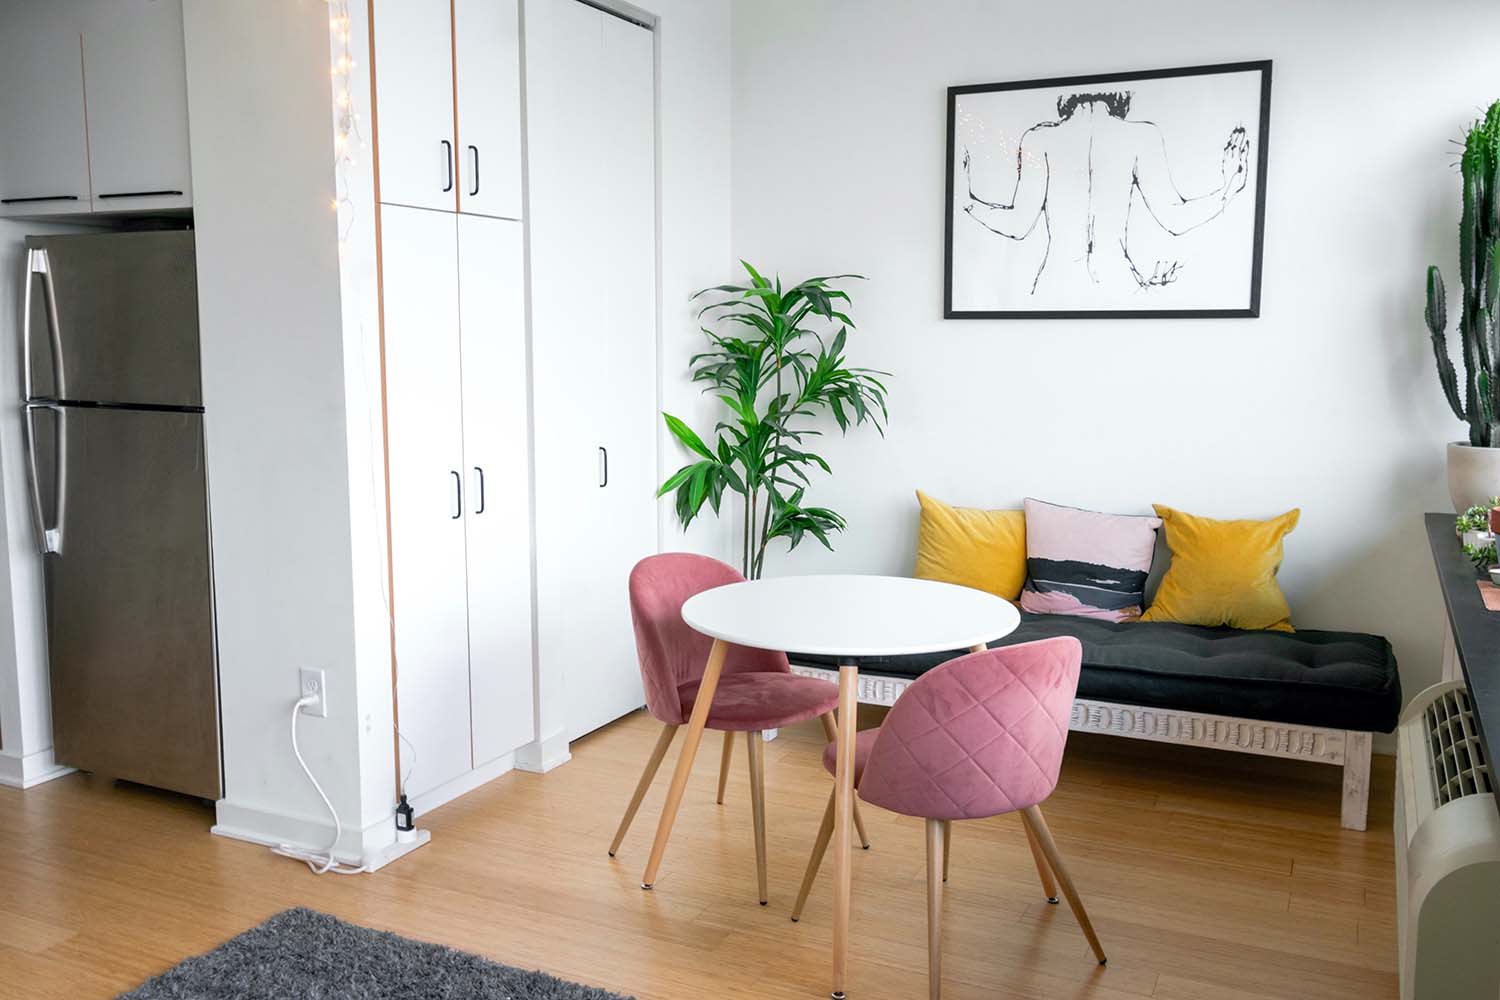 Turn Your Property Into an Airbnb